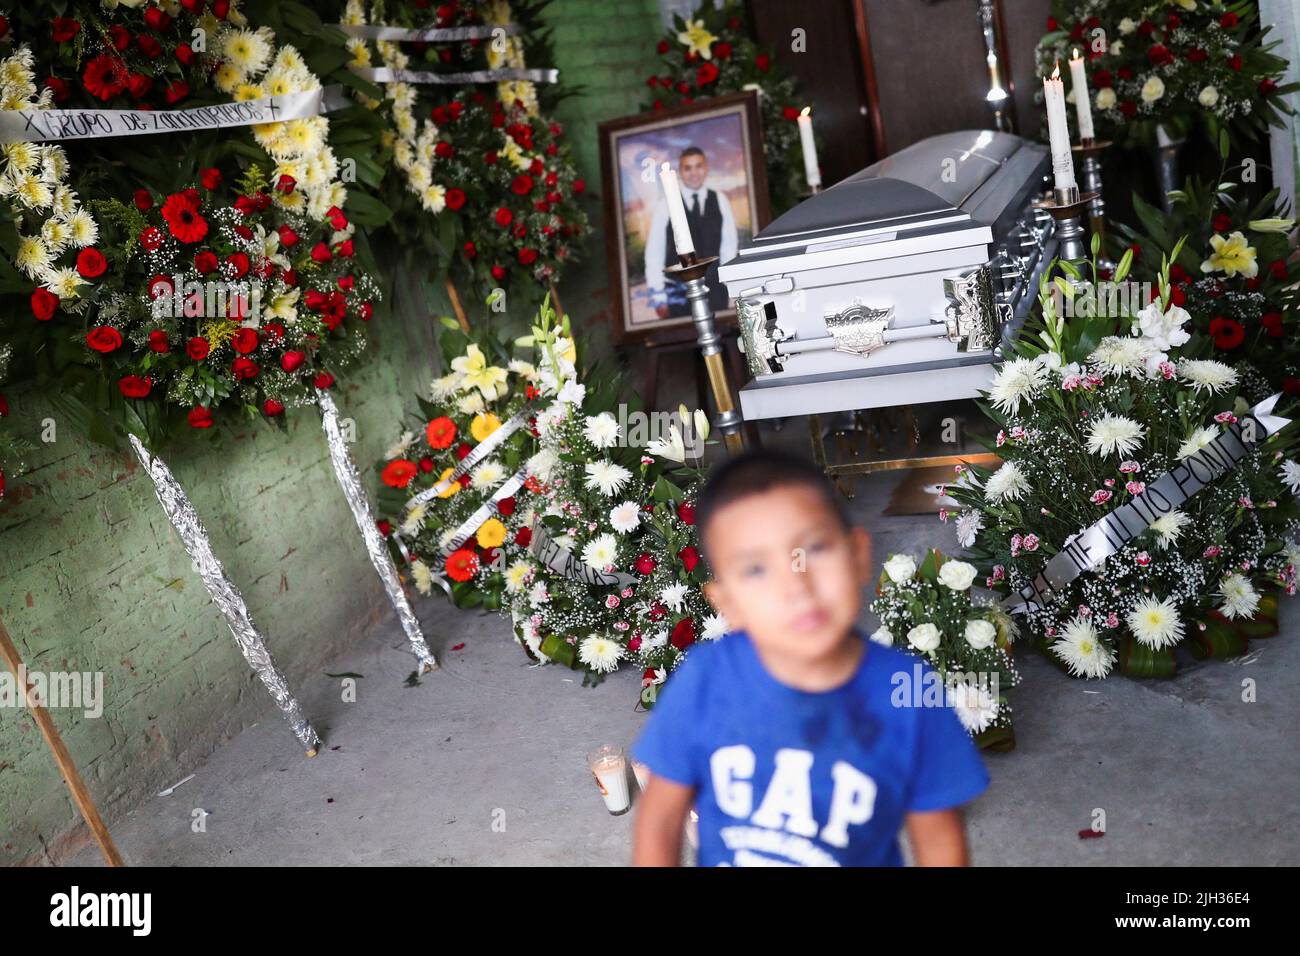 The coffin containing the body of late migrant Jose Lopez, 34, is pictured during his wake after being repatriated from San Antonio, Texas, U.S., at his family's home in Celaya, in Guanajuato state, Mexico July 14, 2022. REUTERS/Edgard Garrido Stock Photo